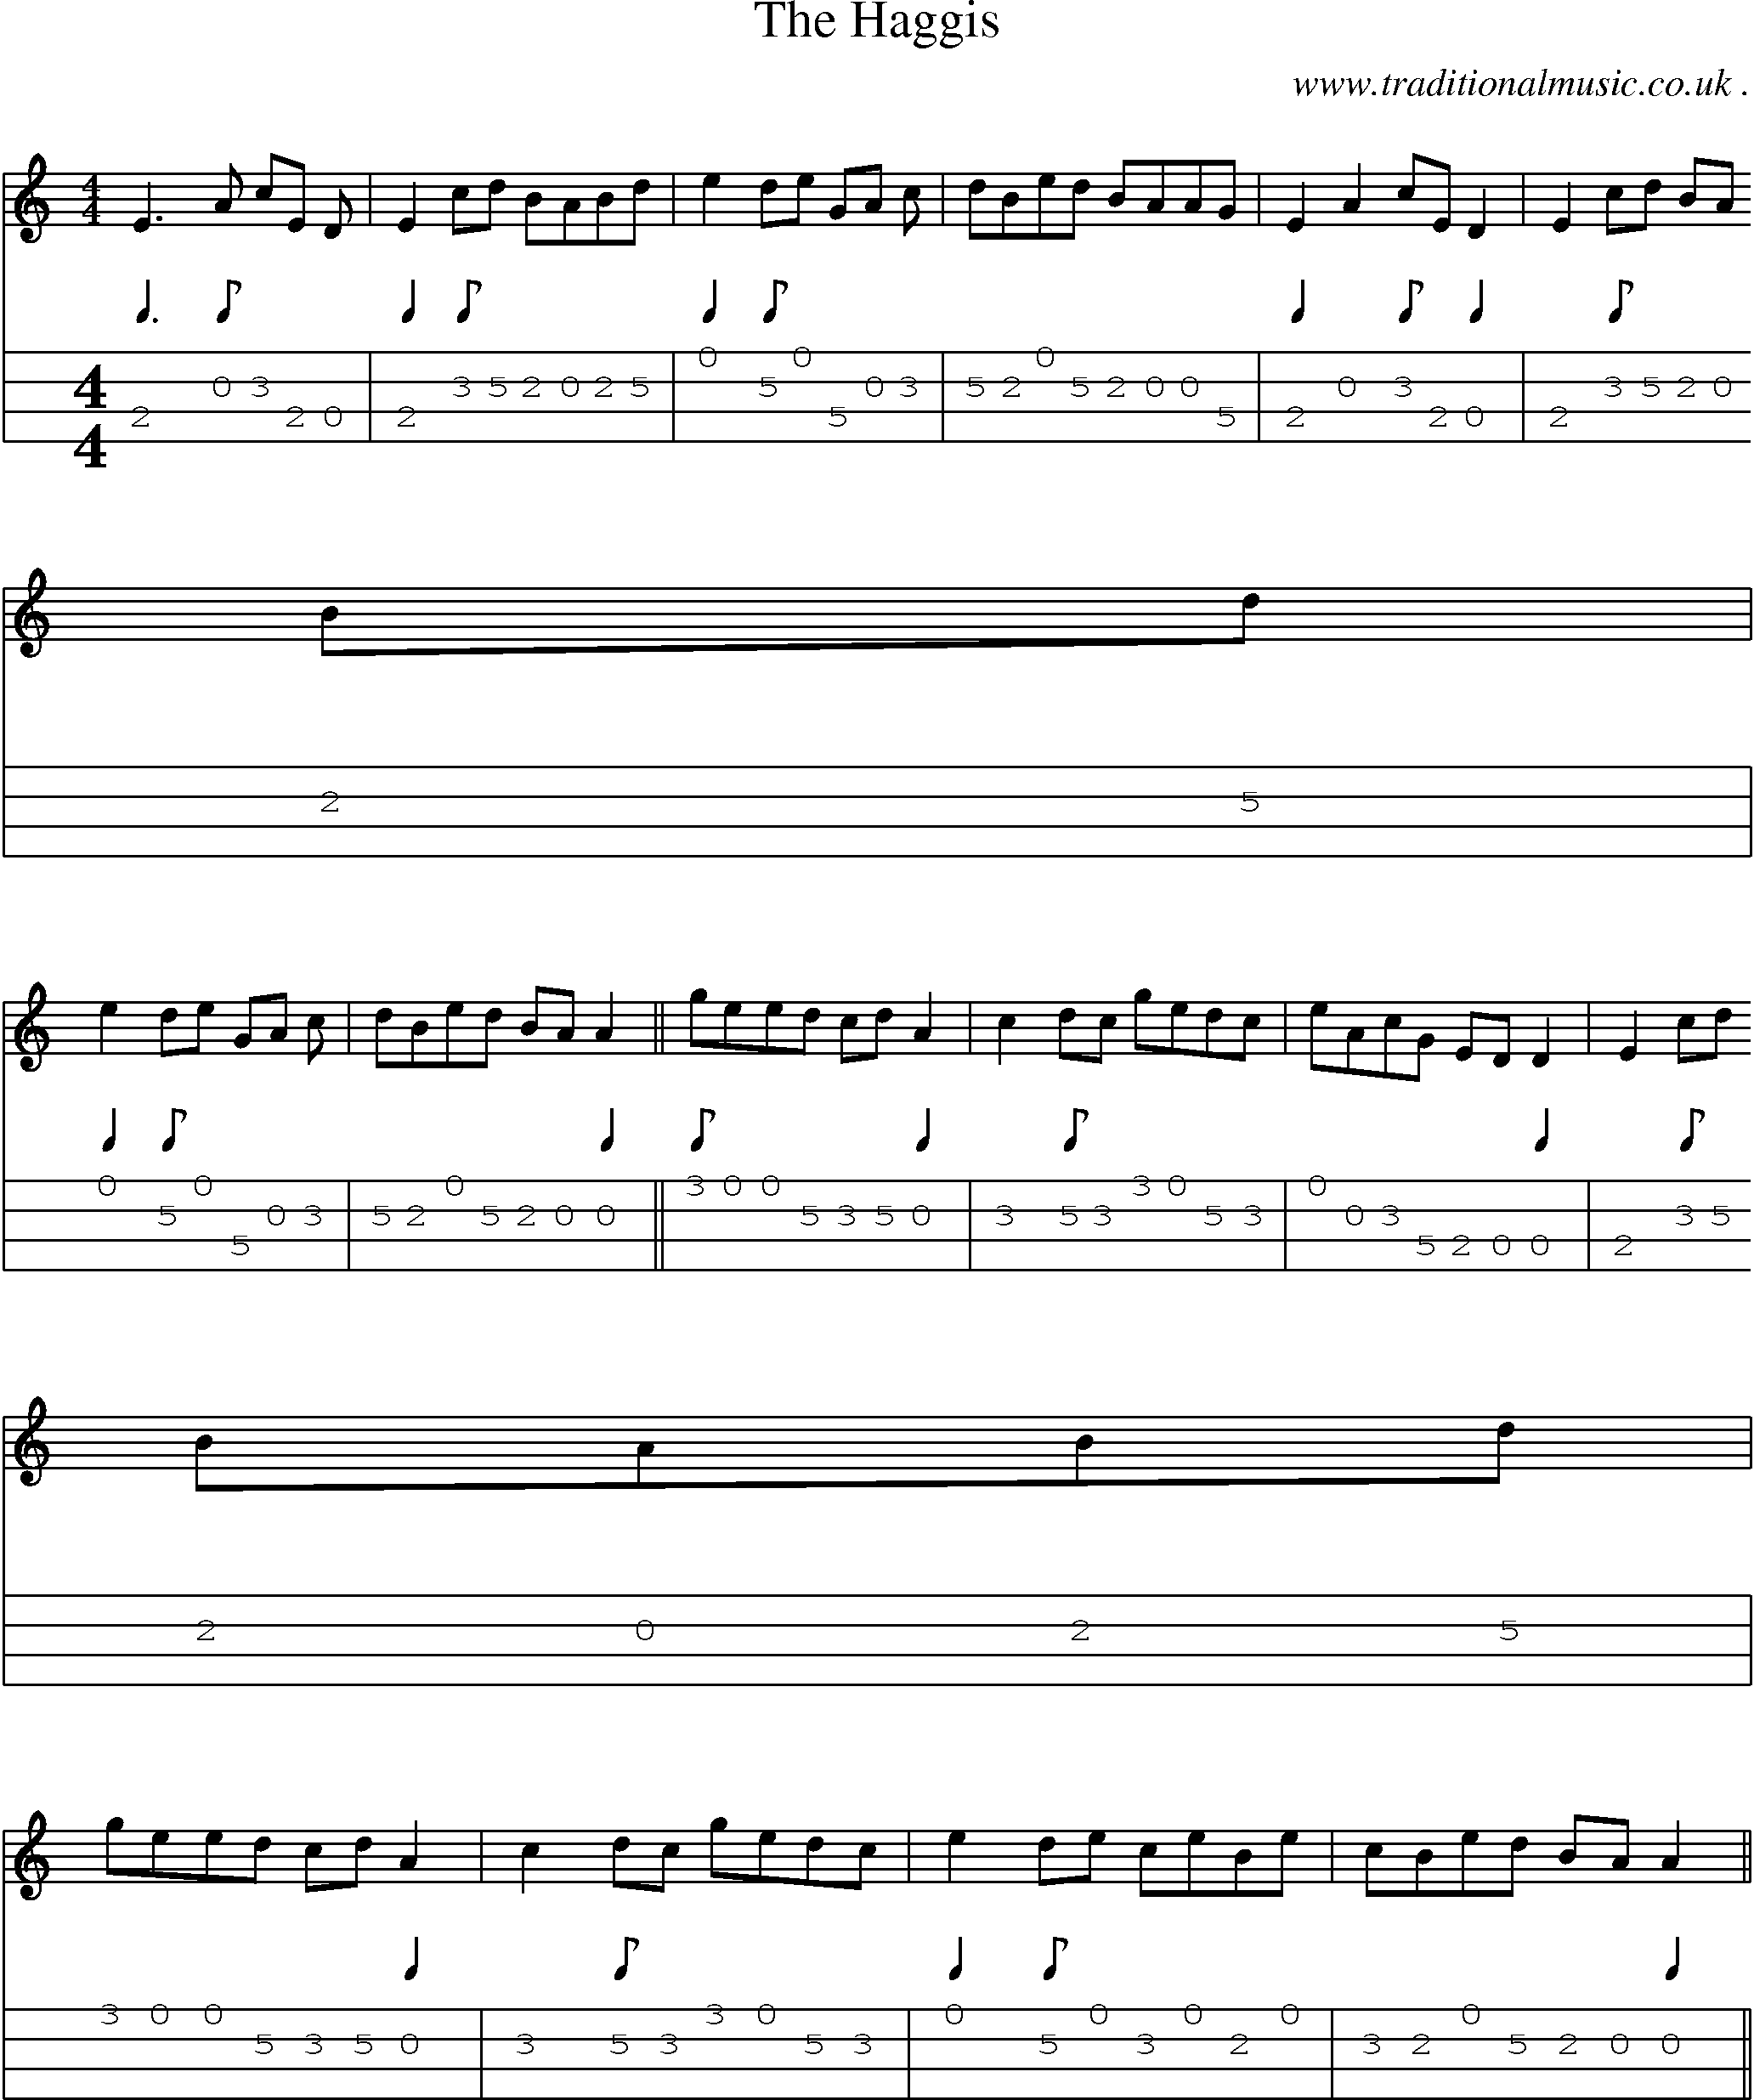 Sheet-music  score, Chords and Mandolin Tabs for The Haggis